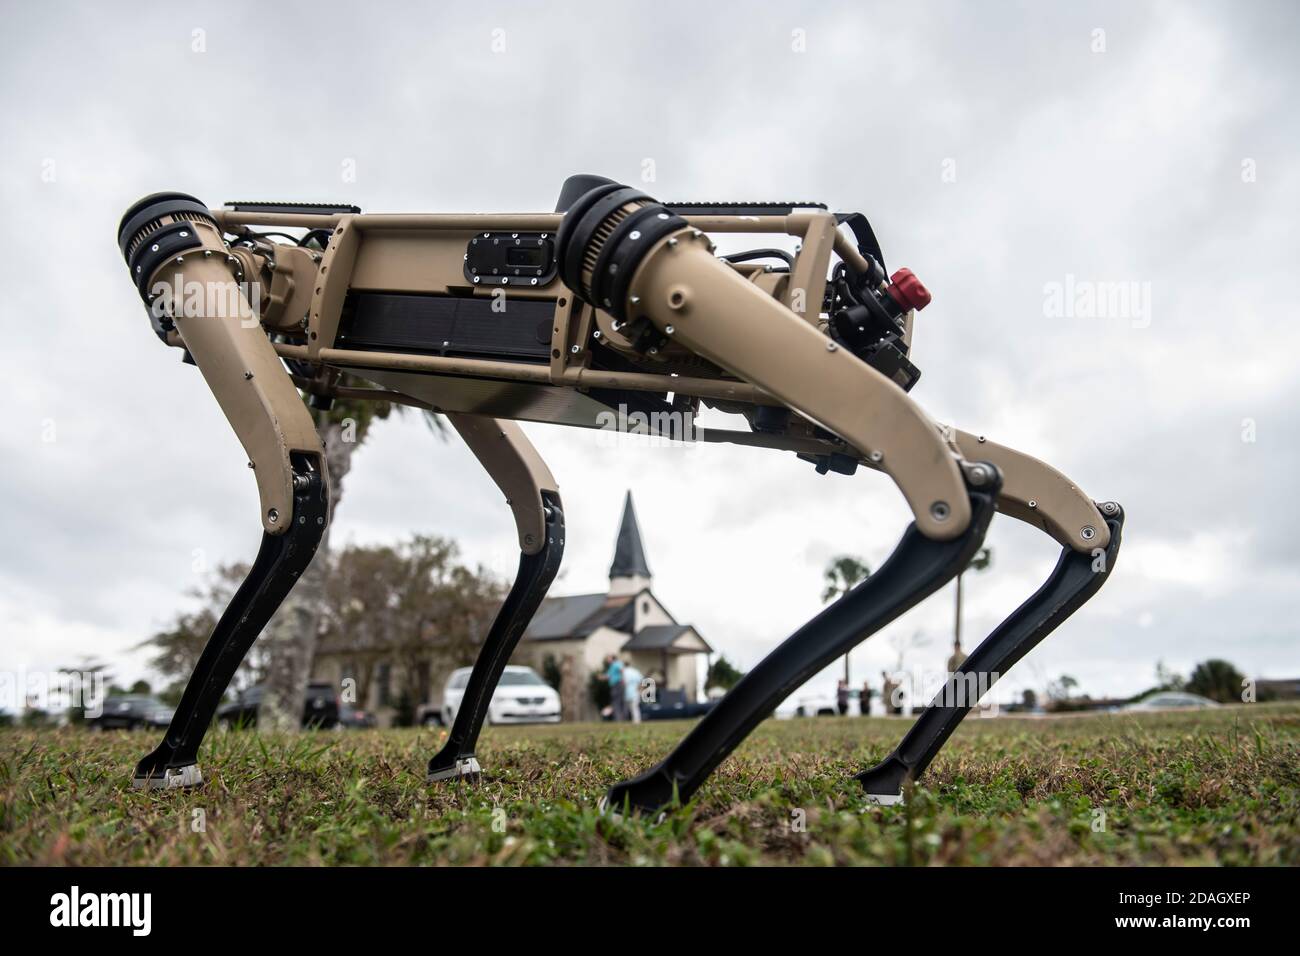 A U.S. Air Force Ghost Q-UGV unmanned ground vehicle known as the robotic dog, is tested at Tyndall Air Force Base November 10, 2020 in Panama City, Florida. Tyndall is one of the first military bases to add the semi-autonomous UGV into their security patrol. Stock Photo